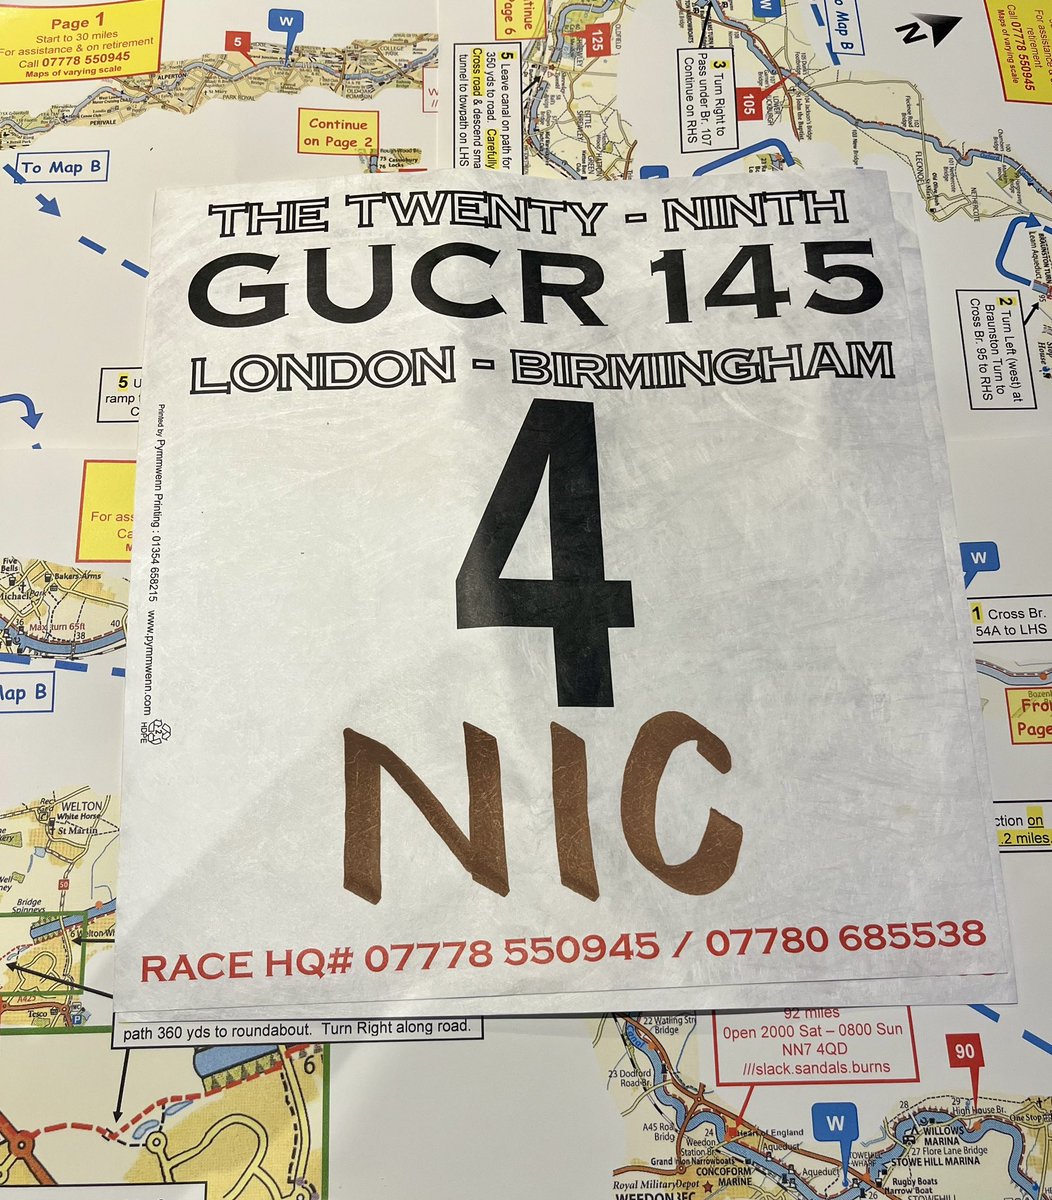 3 weeks today I will be some way up the 145 mile route on the GUCR raising money for @TASCharity by running to Birmingham 🏃🏼‍♀️ Thanks to everyone who has donated so far - if anyone feels they can spare some pennies for a great charity 👇🙏 justgiving.com/page/nicole-at…